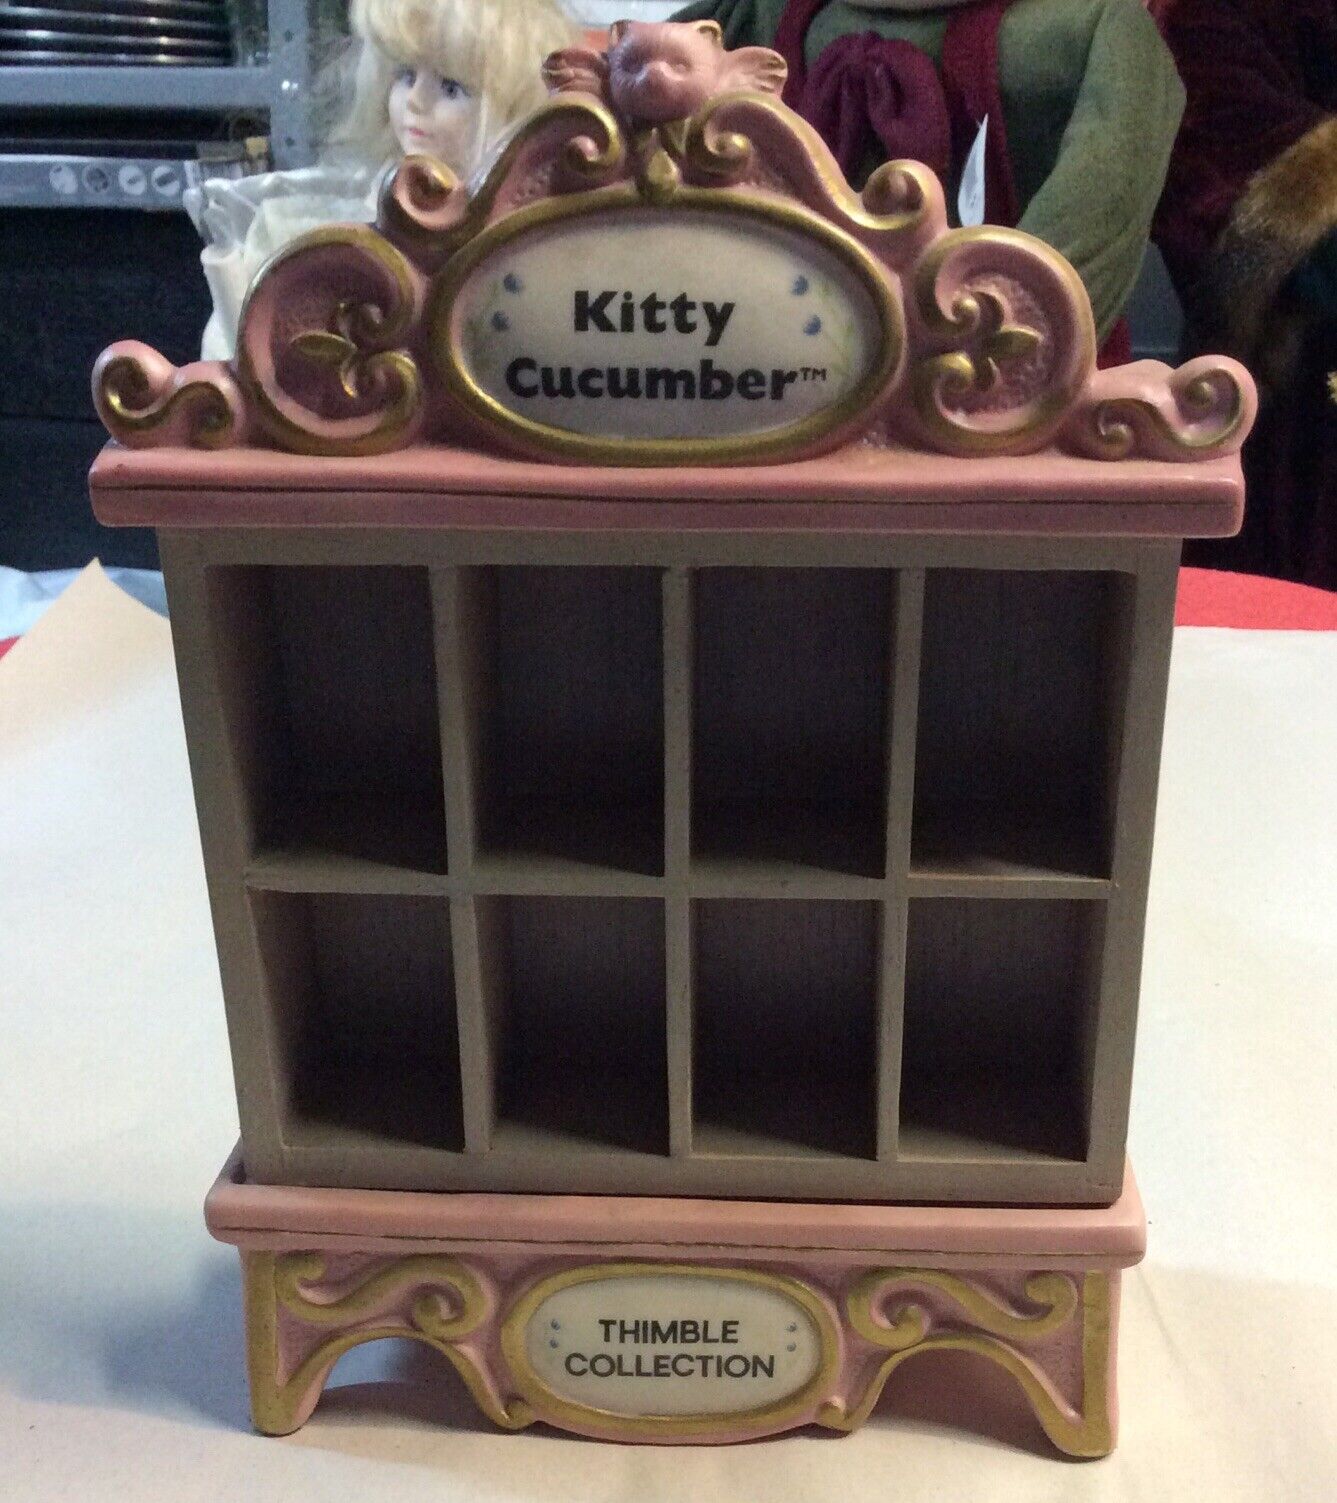 VTG SCHMID KITTY CUCUMBER THIMBLE COLLECTION MUSICAL DISPLAY. 9.5” Height.